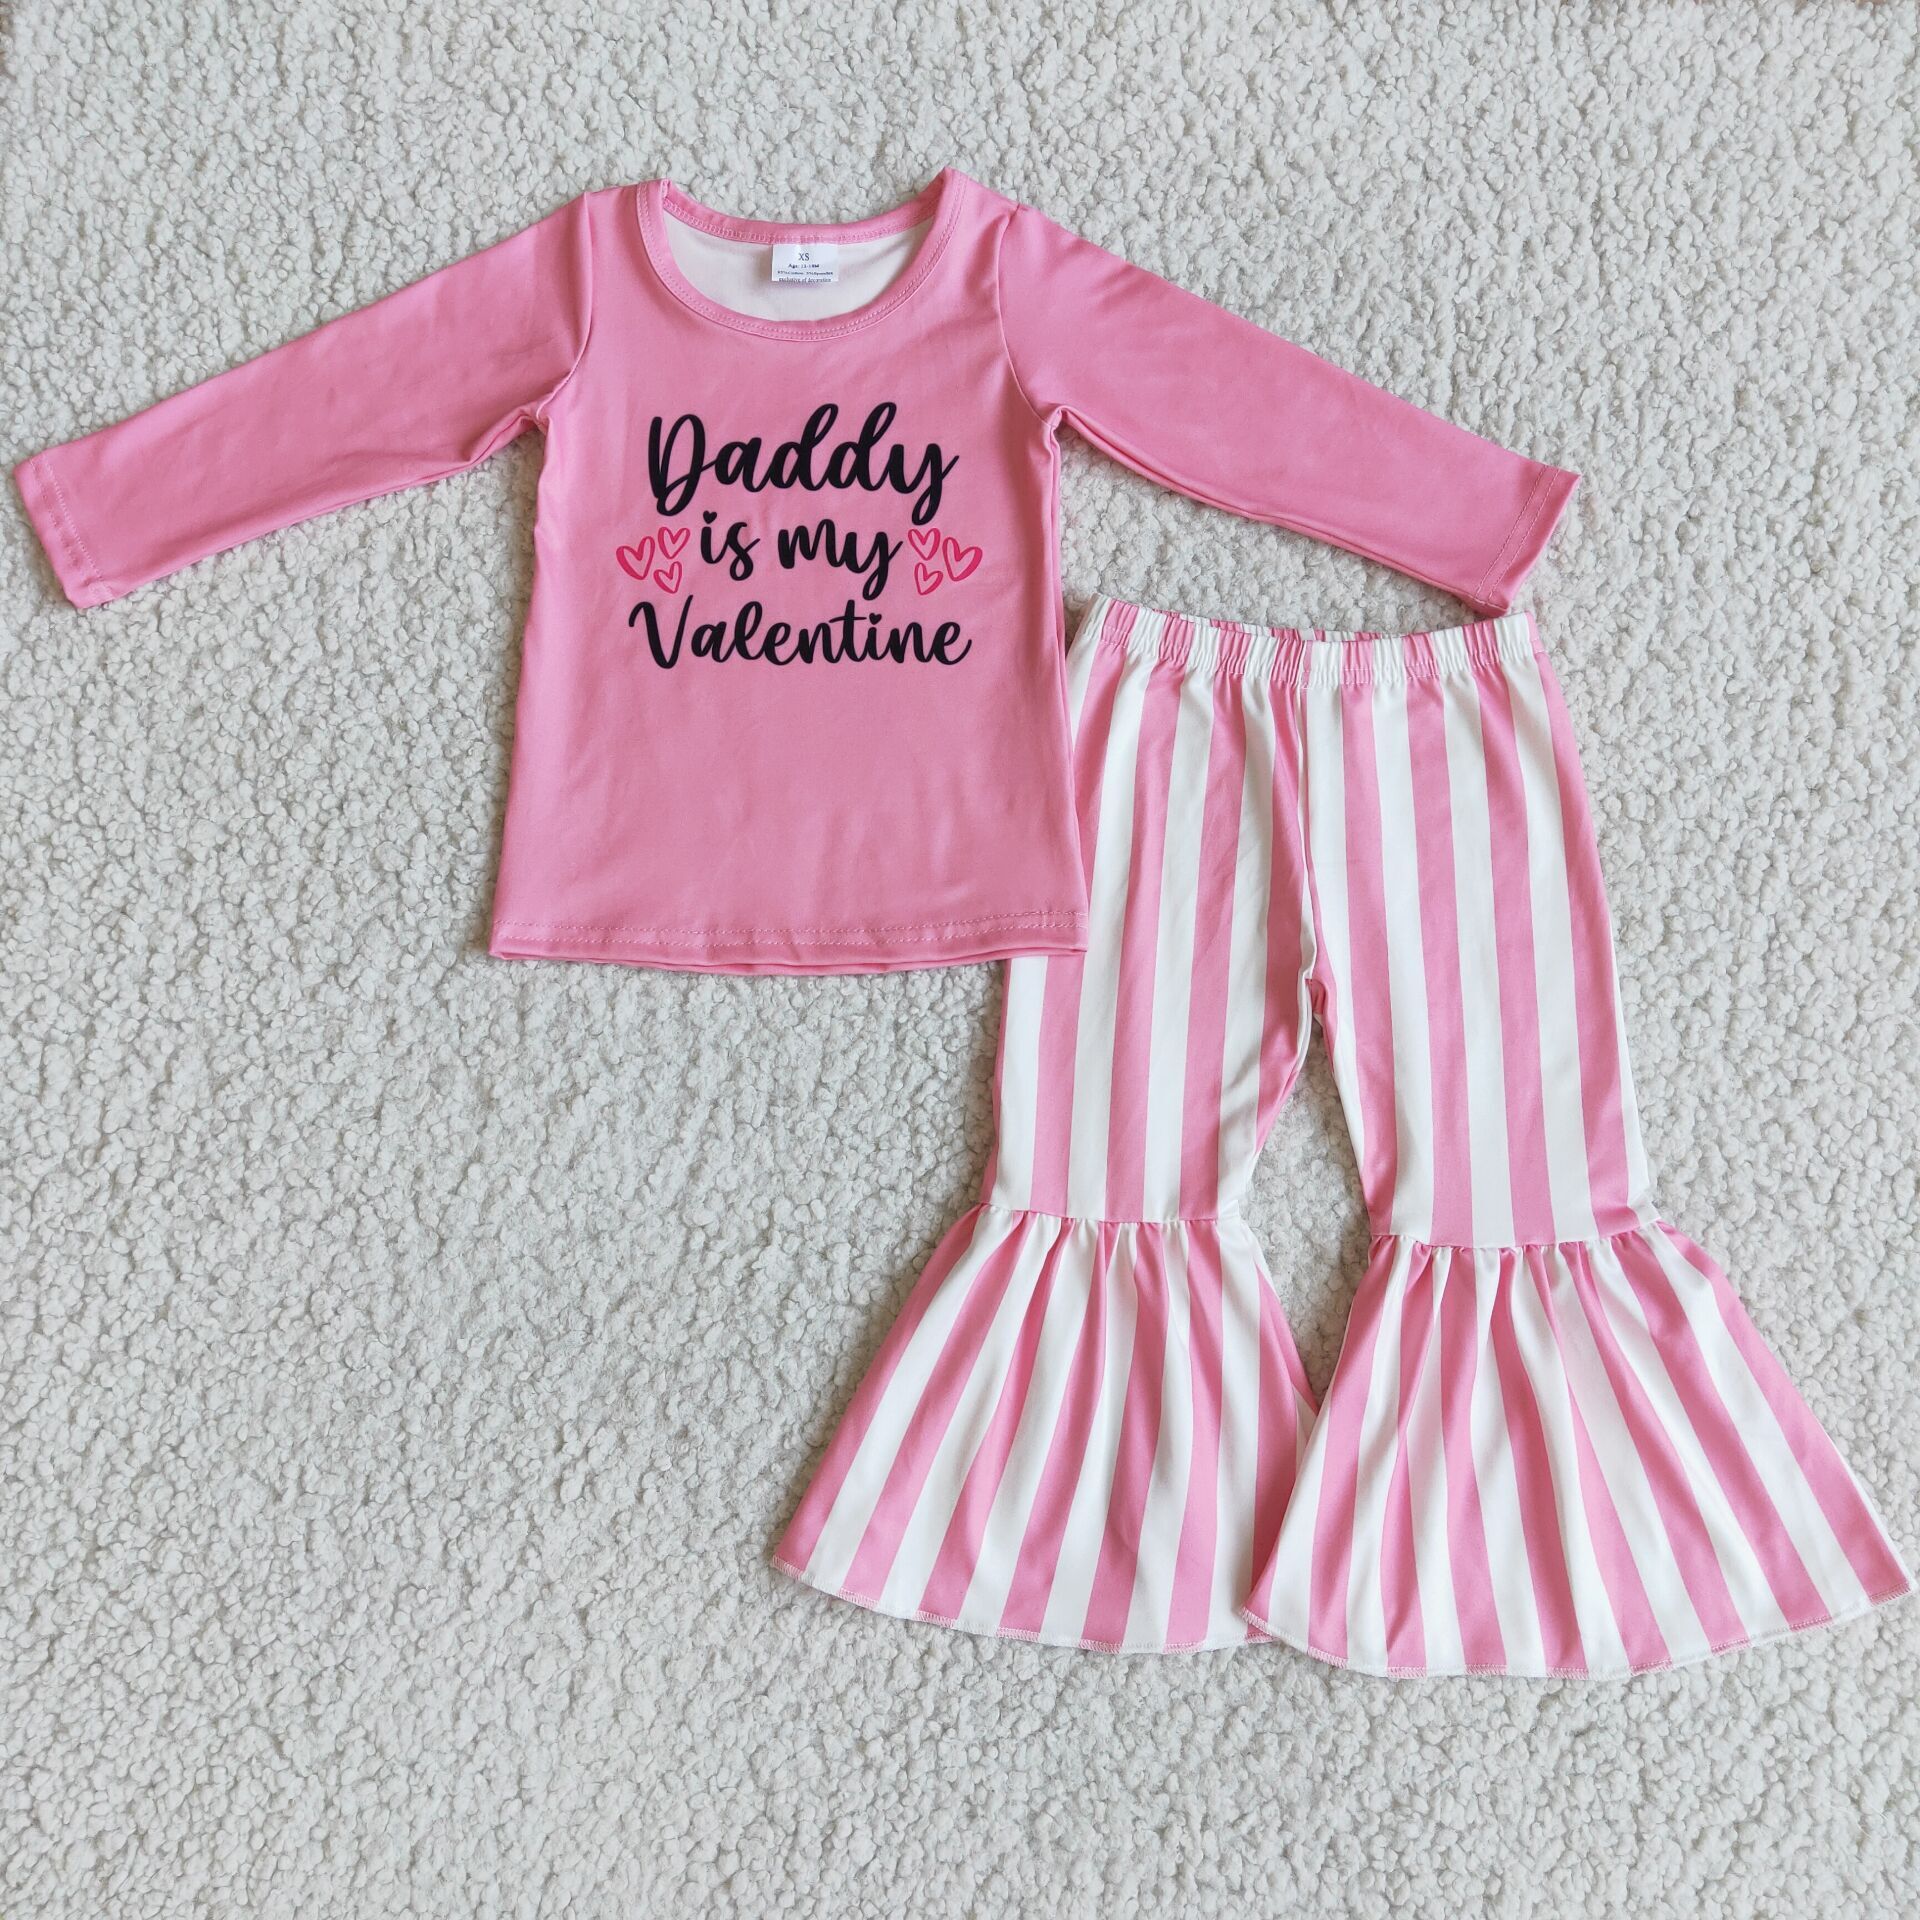 6 B9-35 kids clothes girls daddy valentines day outfits